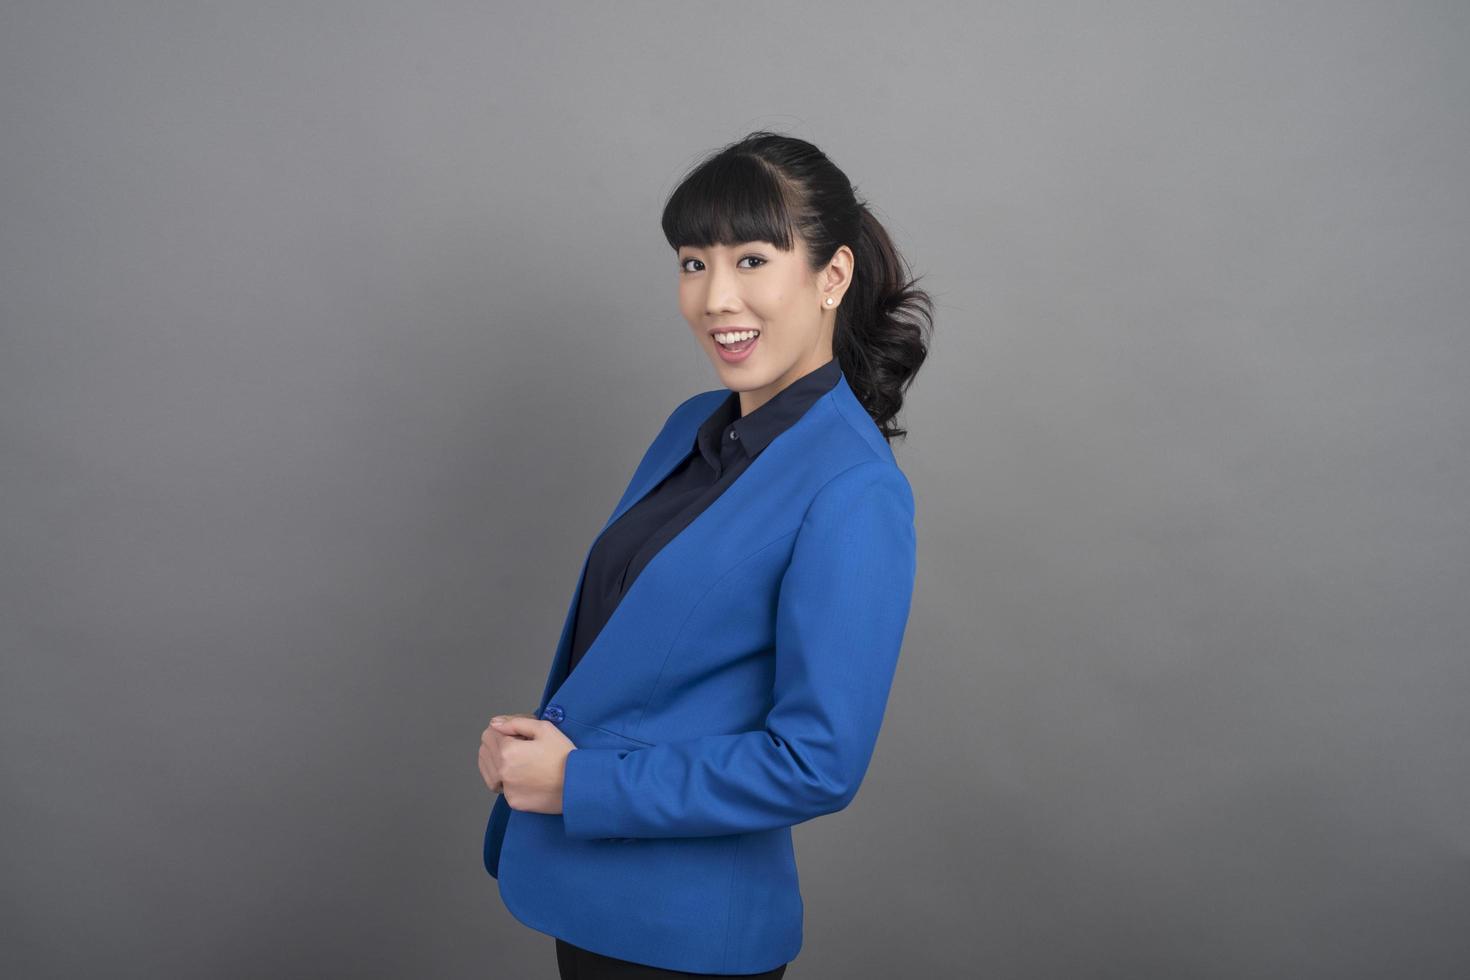 Smiling business woman in blue blazer on grey background photo